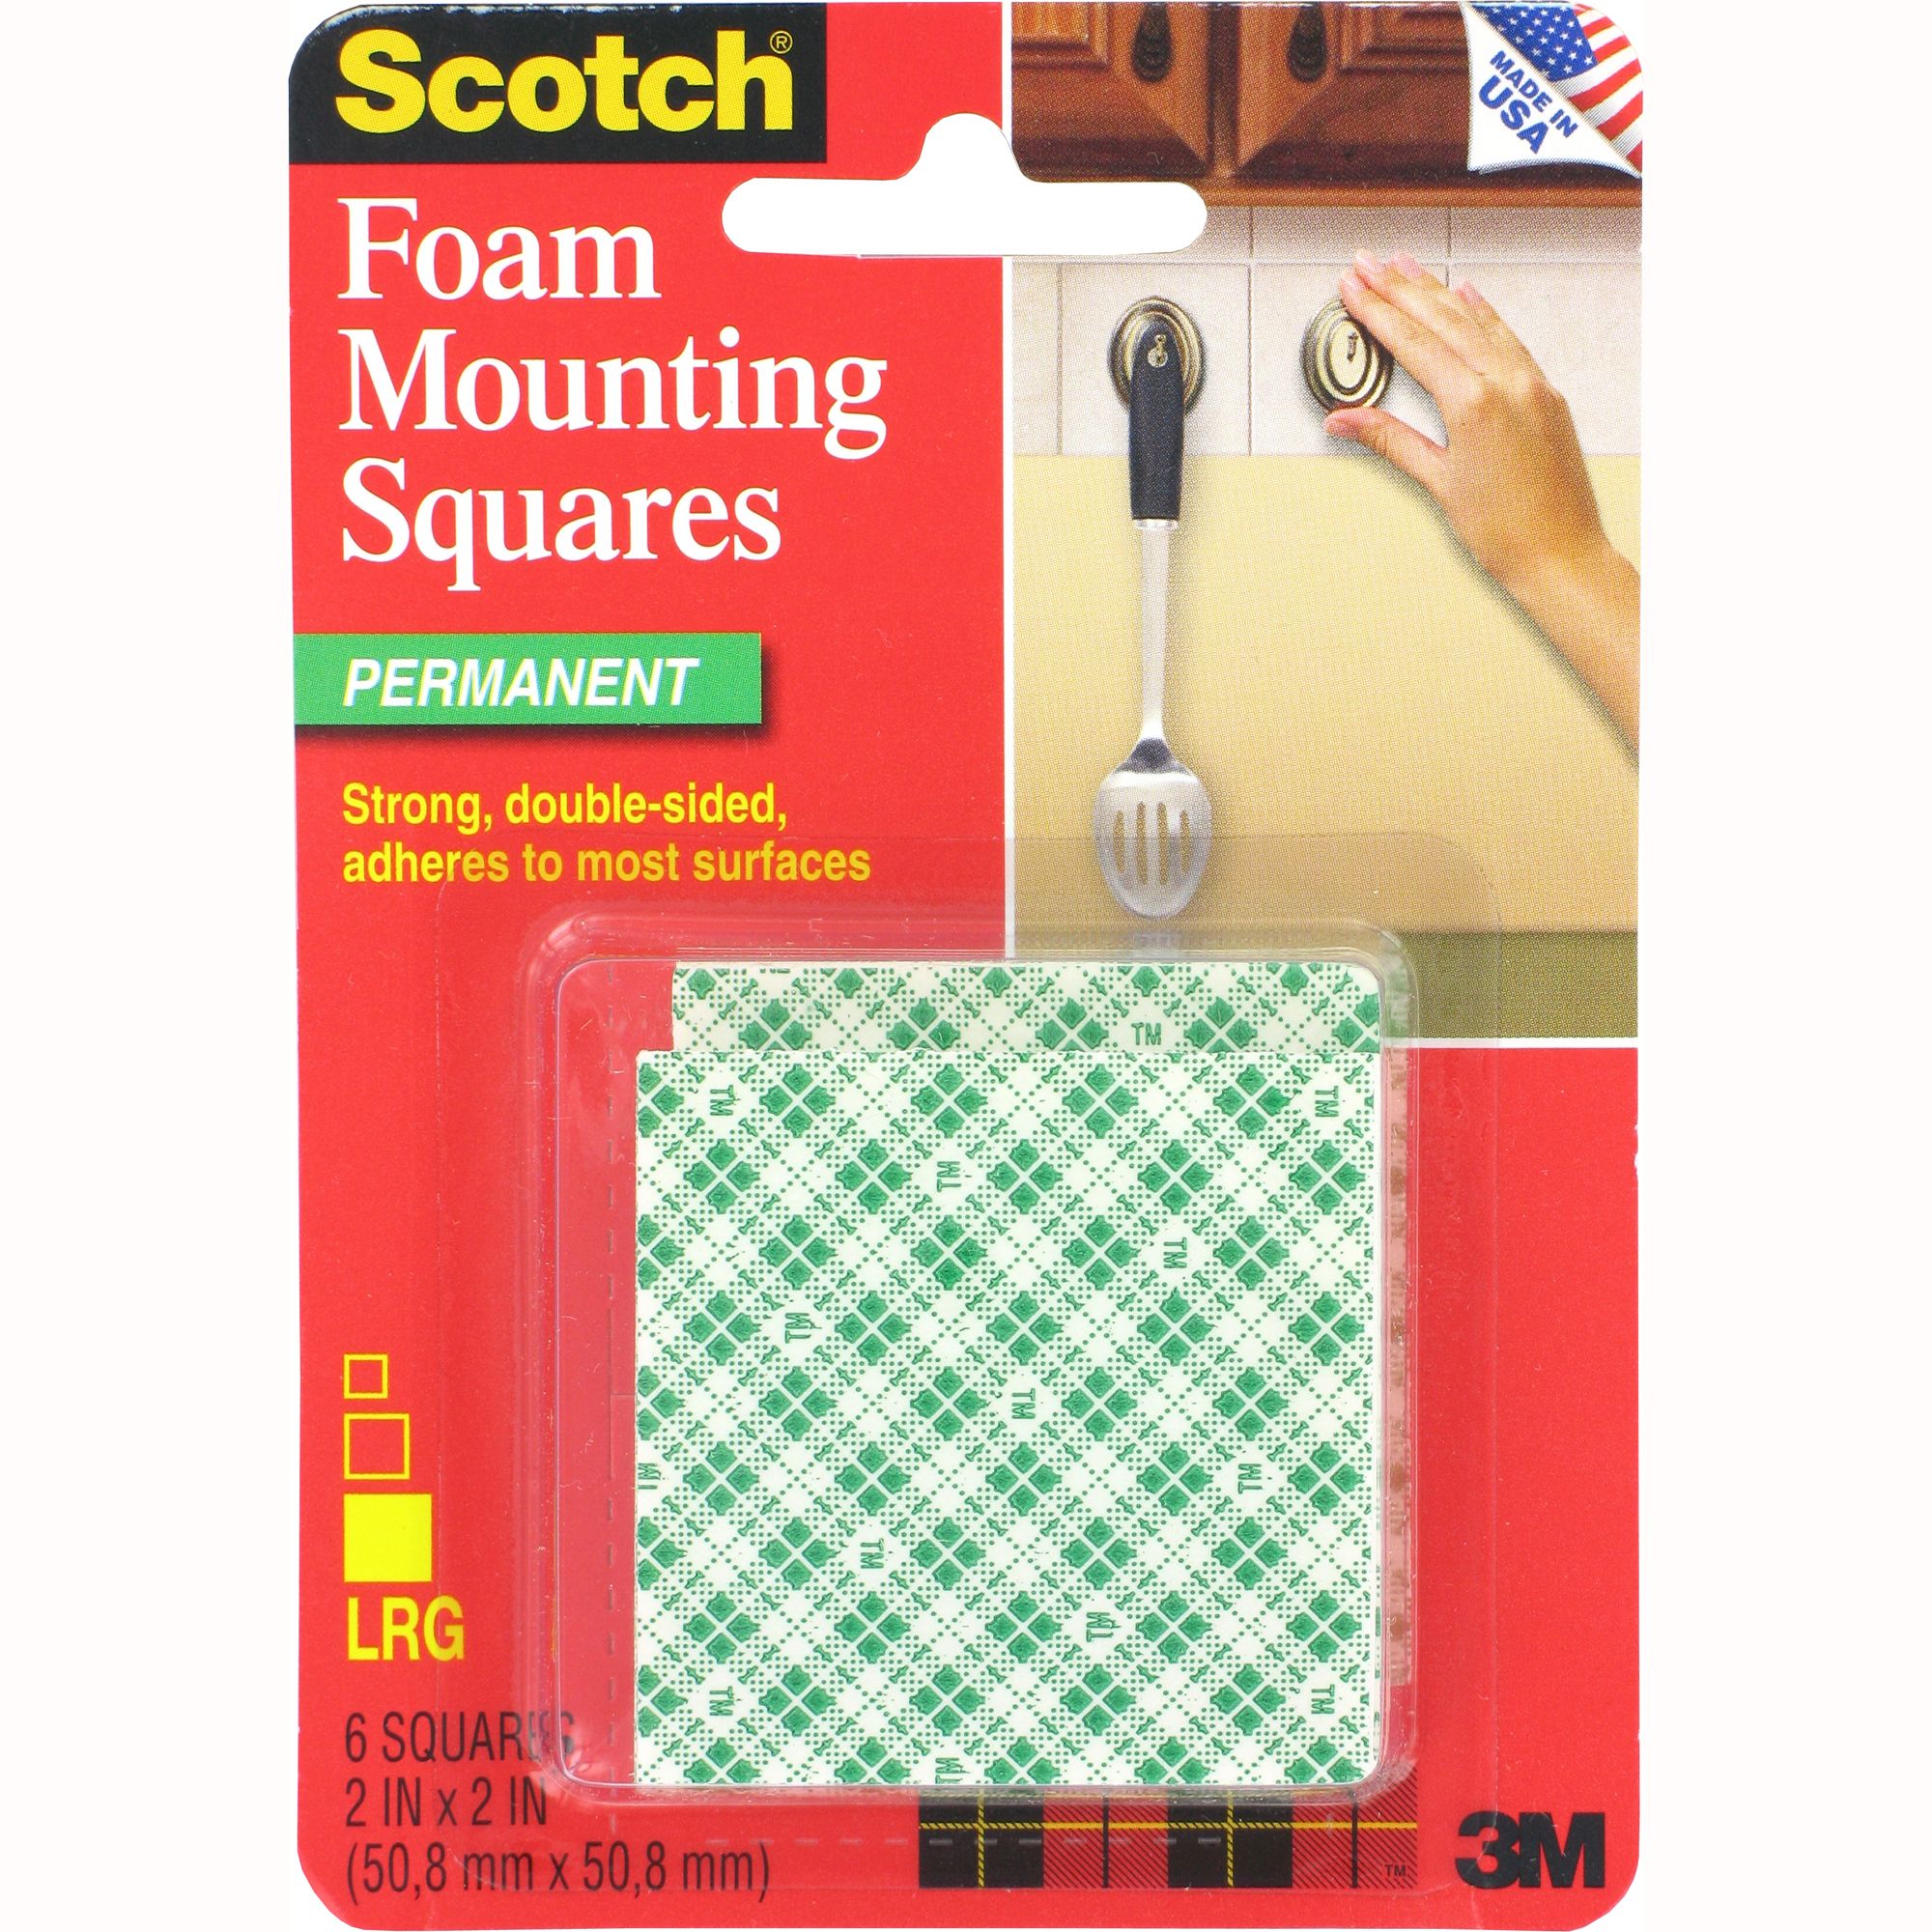 UPC 051131969322 product image for Foam Mountingsquares 2X2 Inch | upcitemdb.com